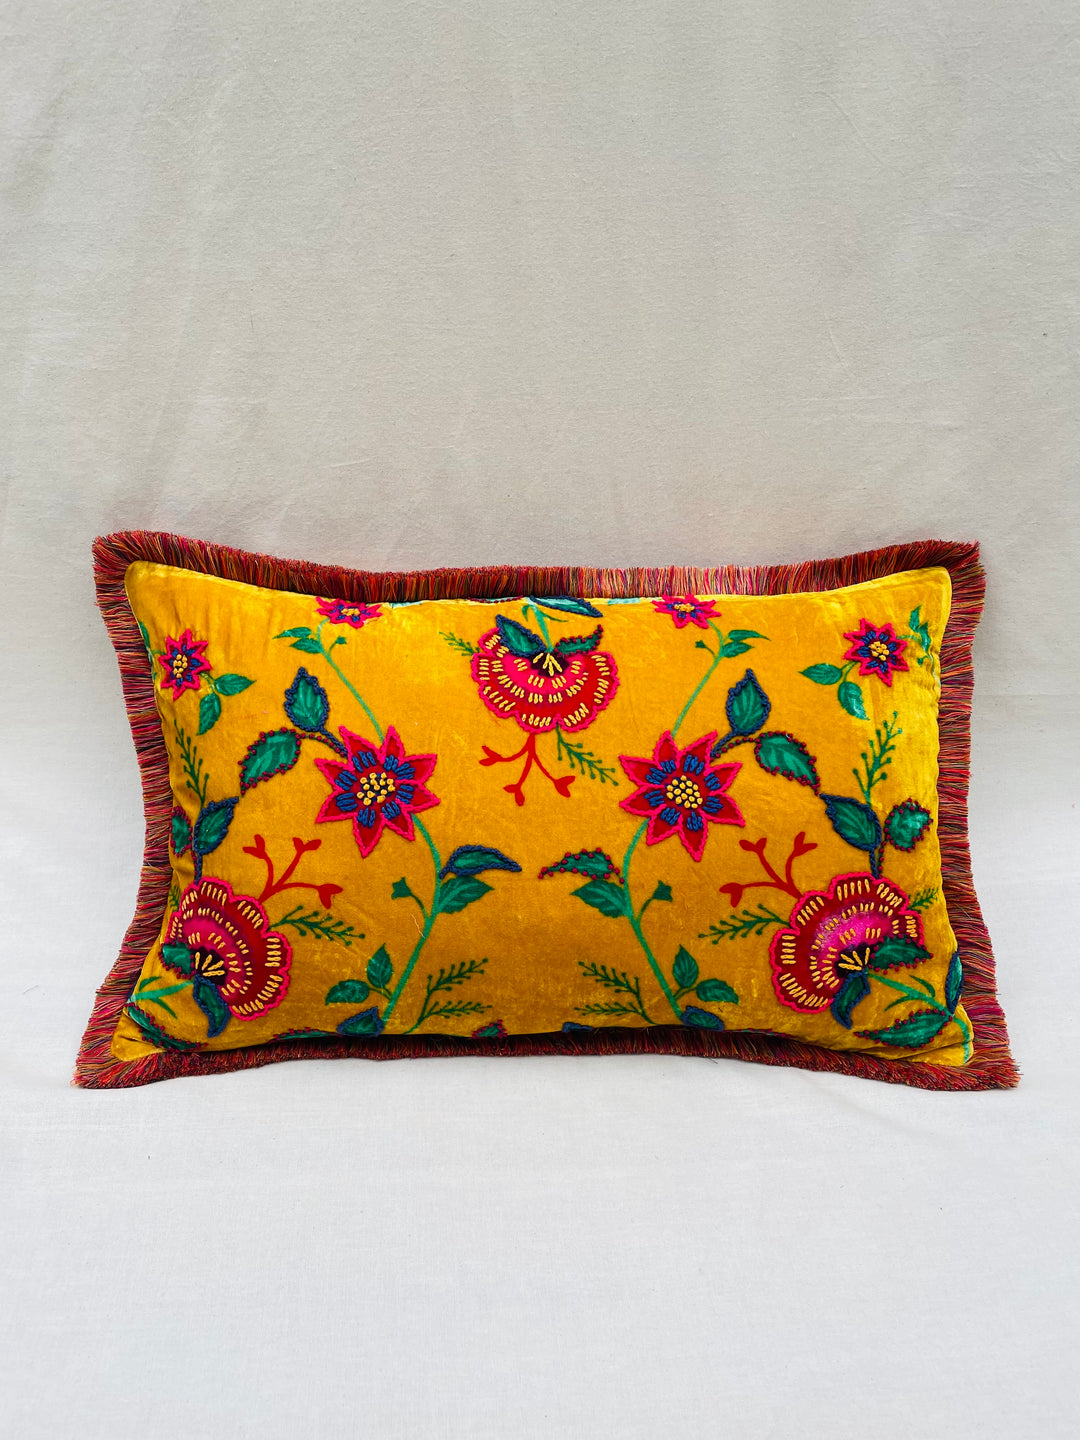 Gold Velvet Floral Embroidered Throw Pillow Cover